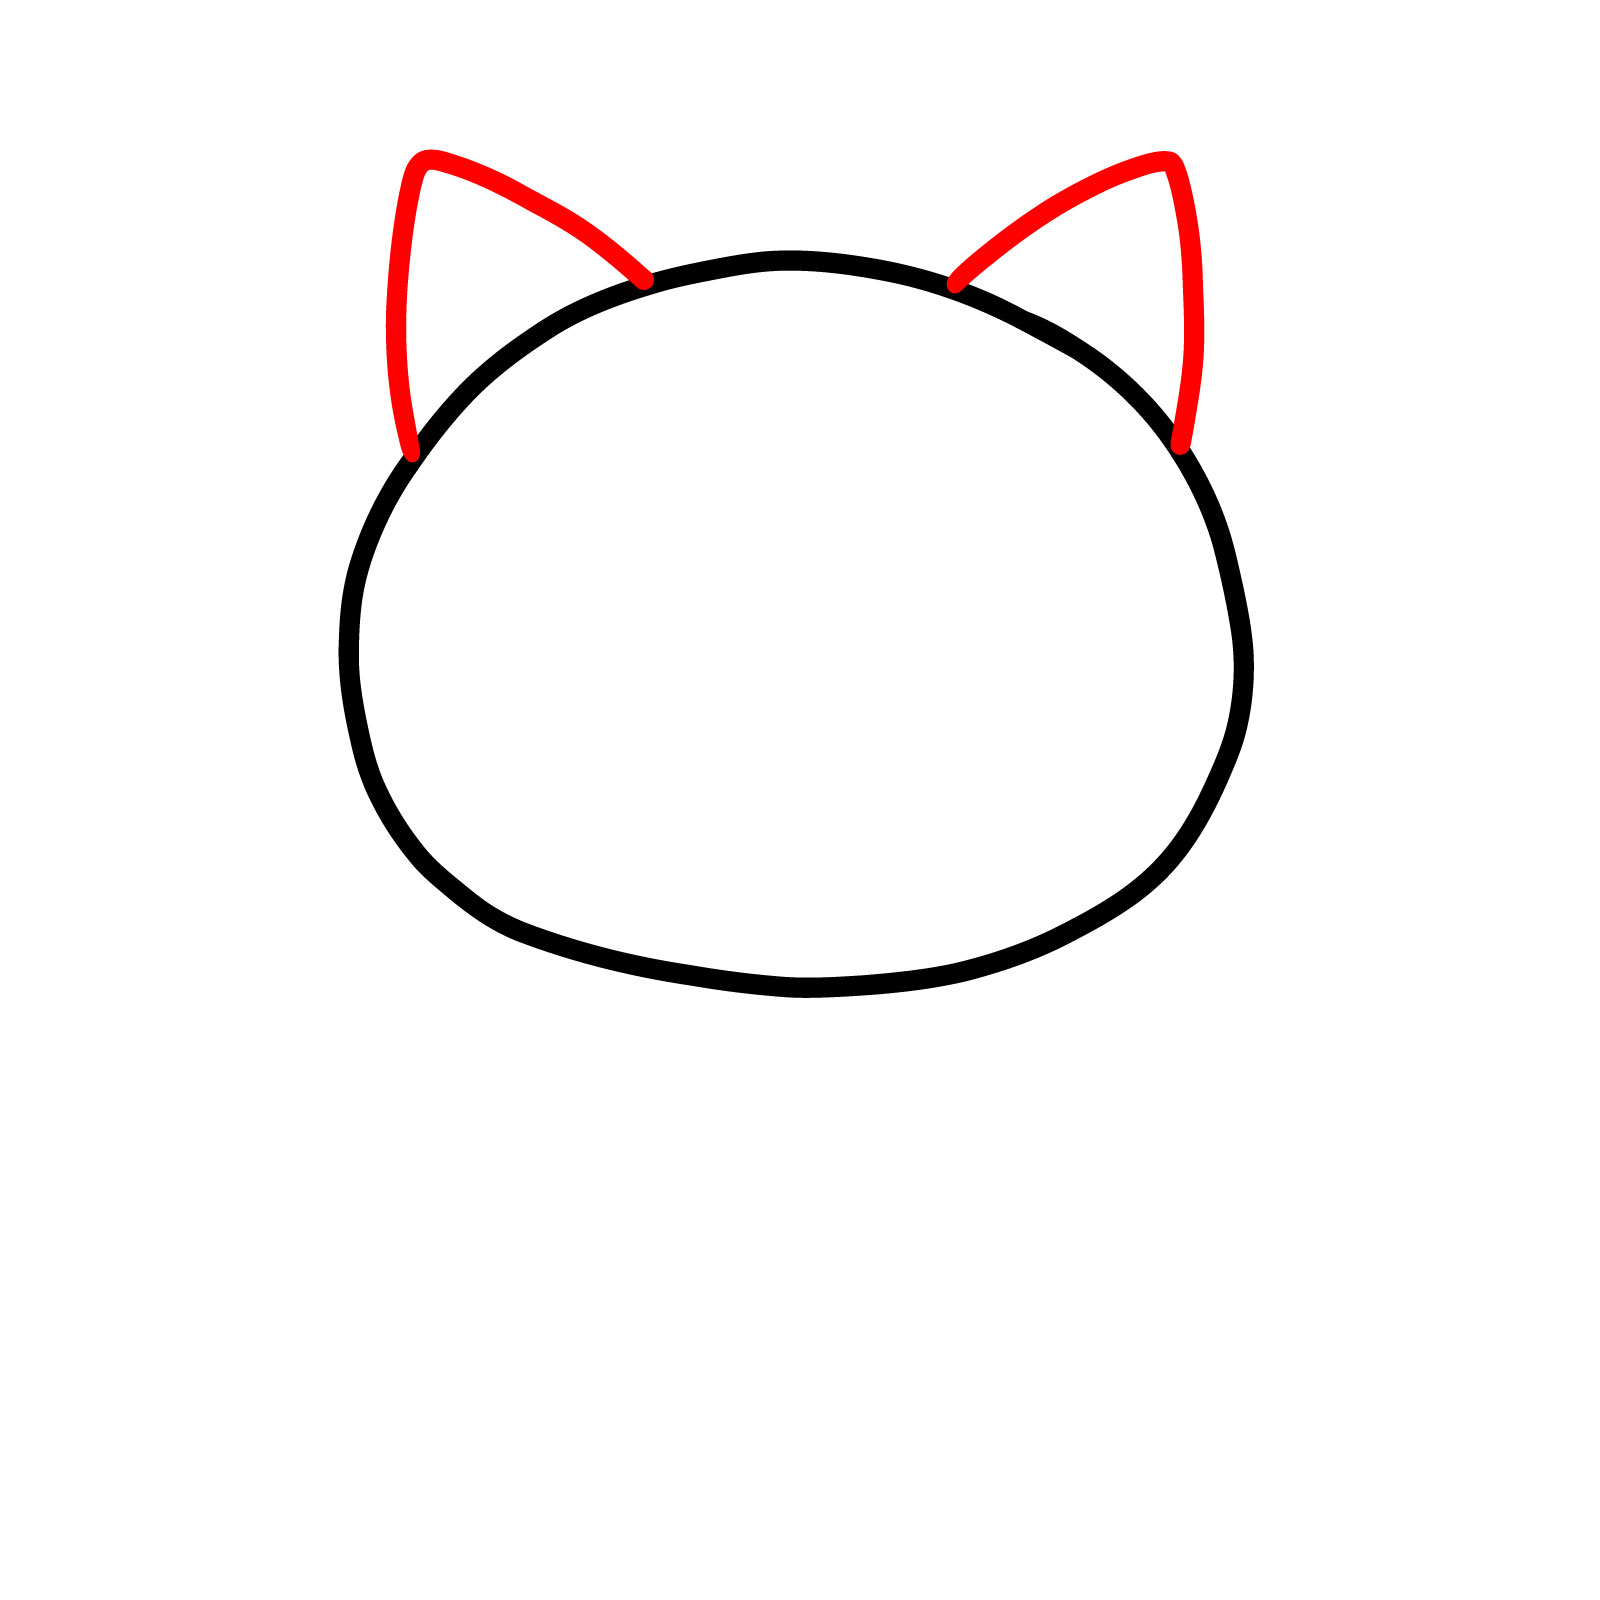 Triangular ears added to the top of the cat's head - step 02